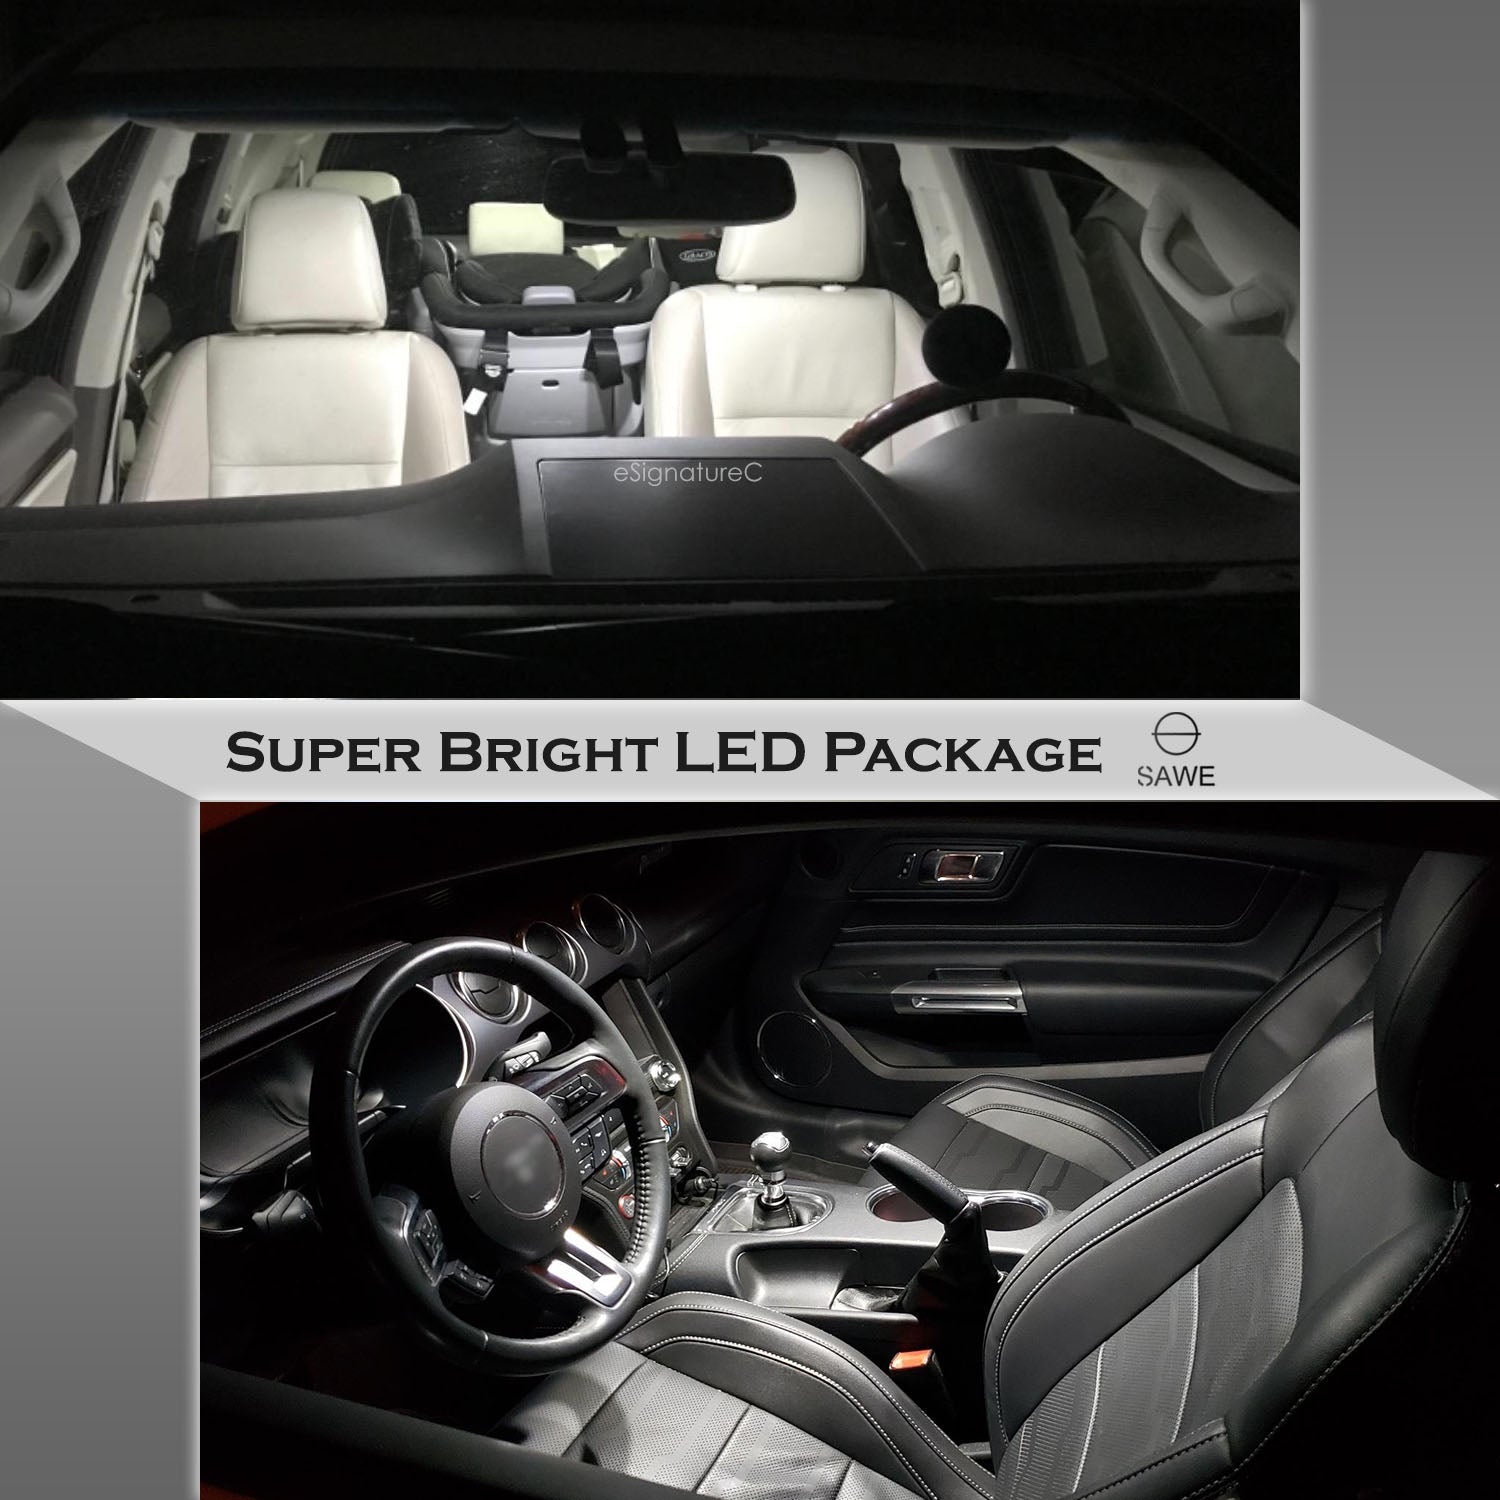 For Ford Escape Interior LED Lights - Dome & Map Light Bulbs Package Kit for 2008 - 2012 - White